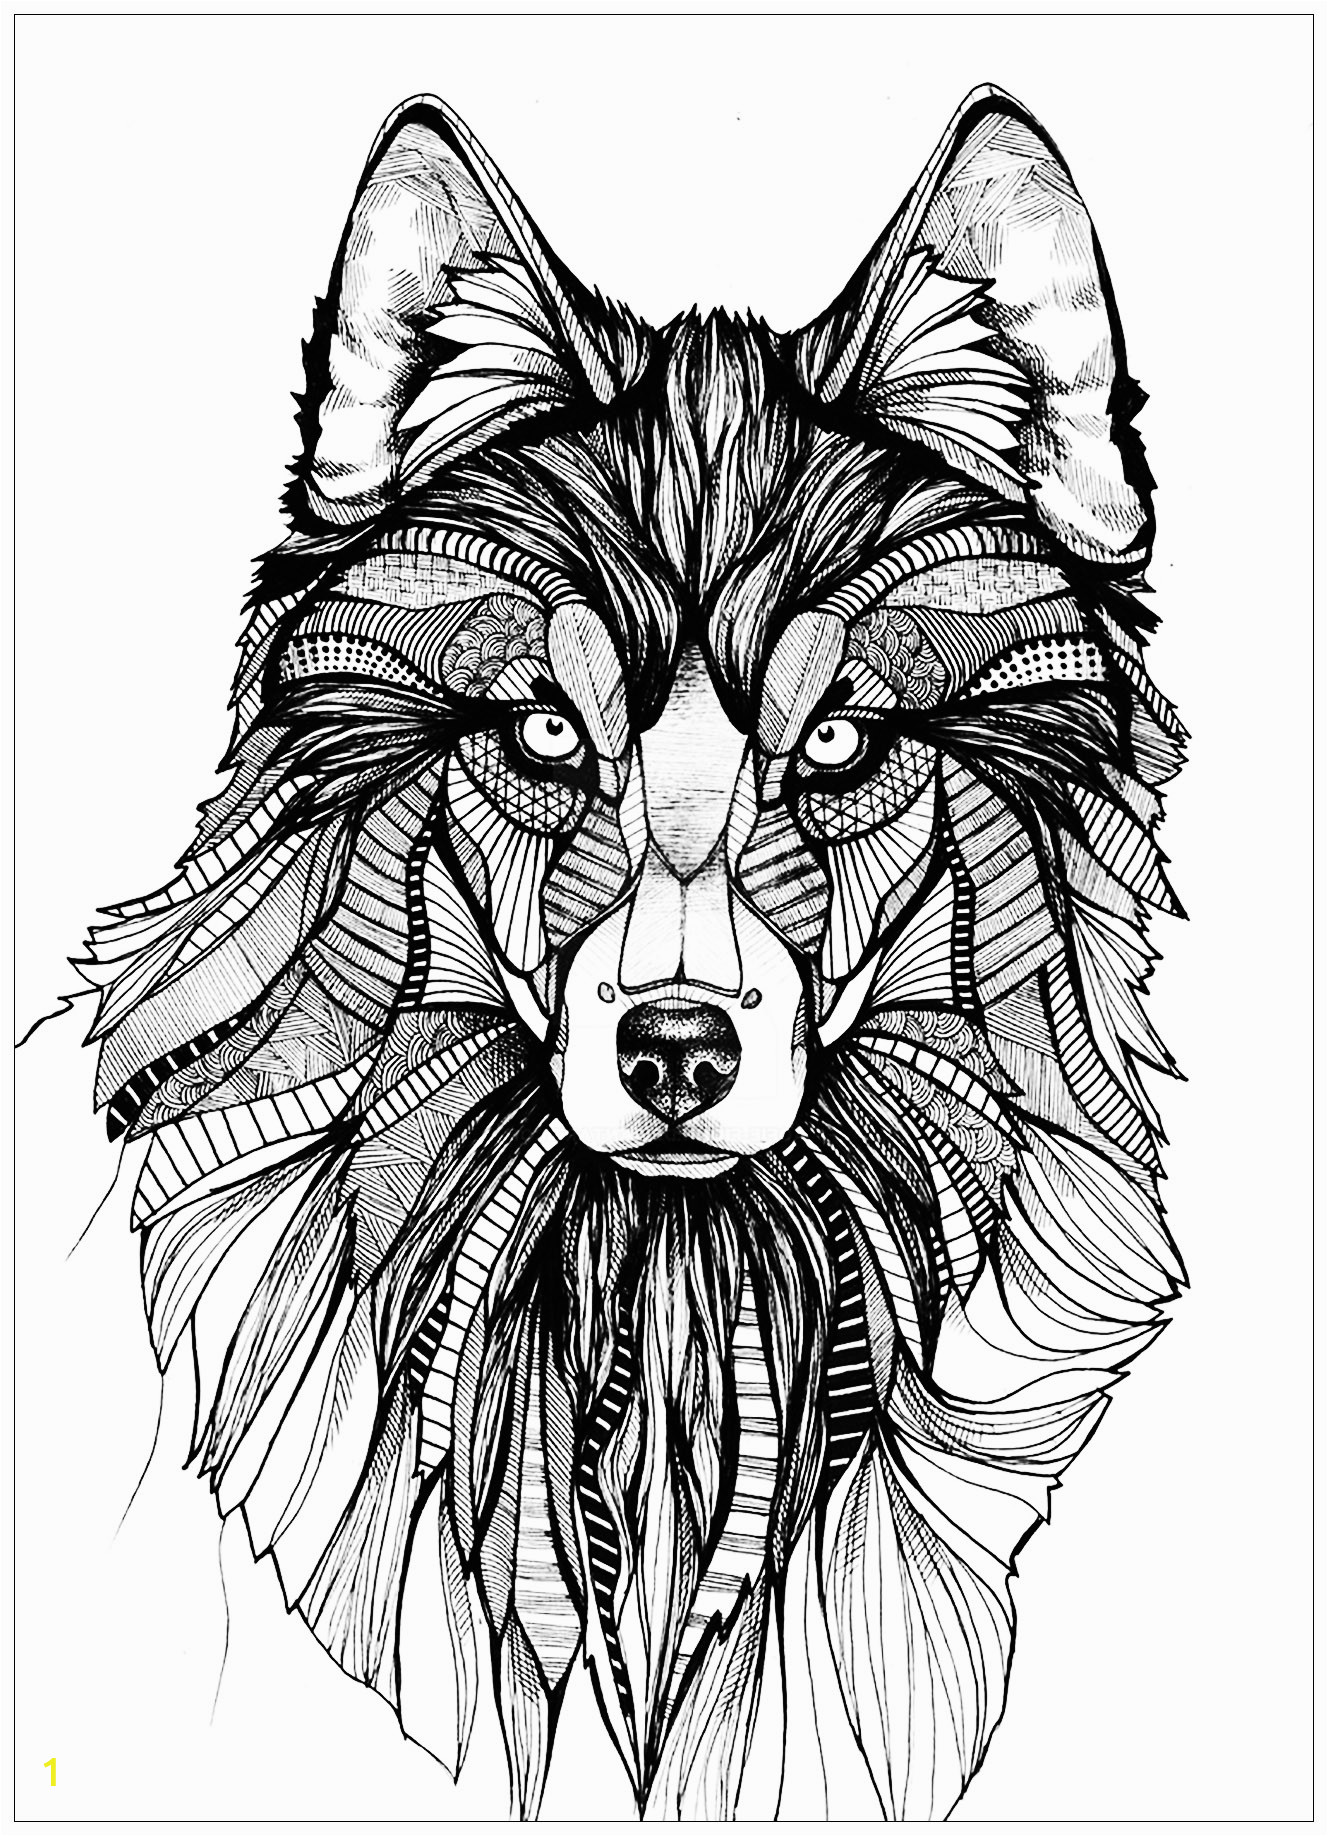 Wolf Coloring Pages to Print Out Wolf Coloring Pages for Adults Best Coloring Pages for Kids